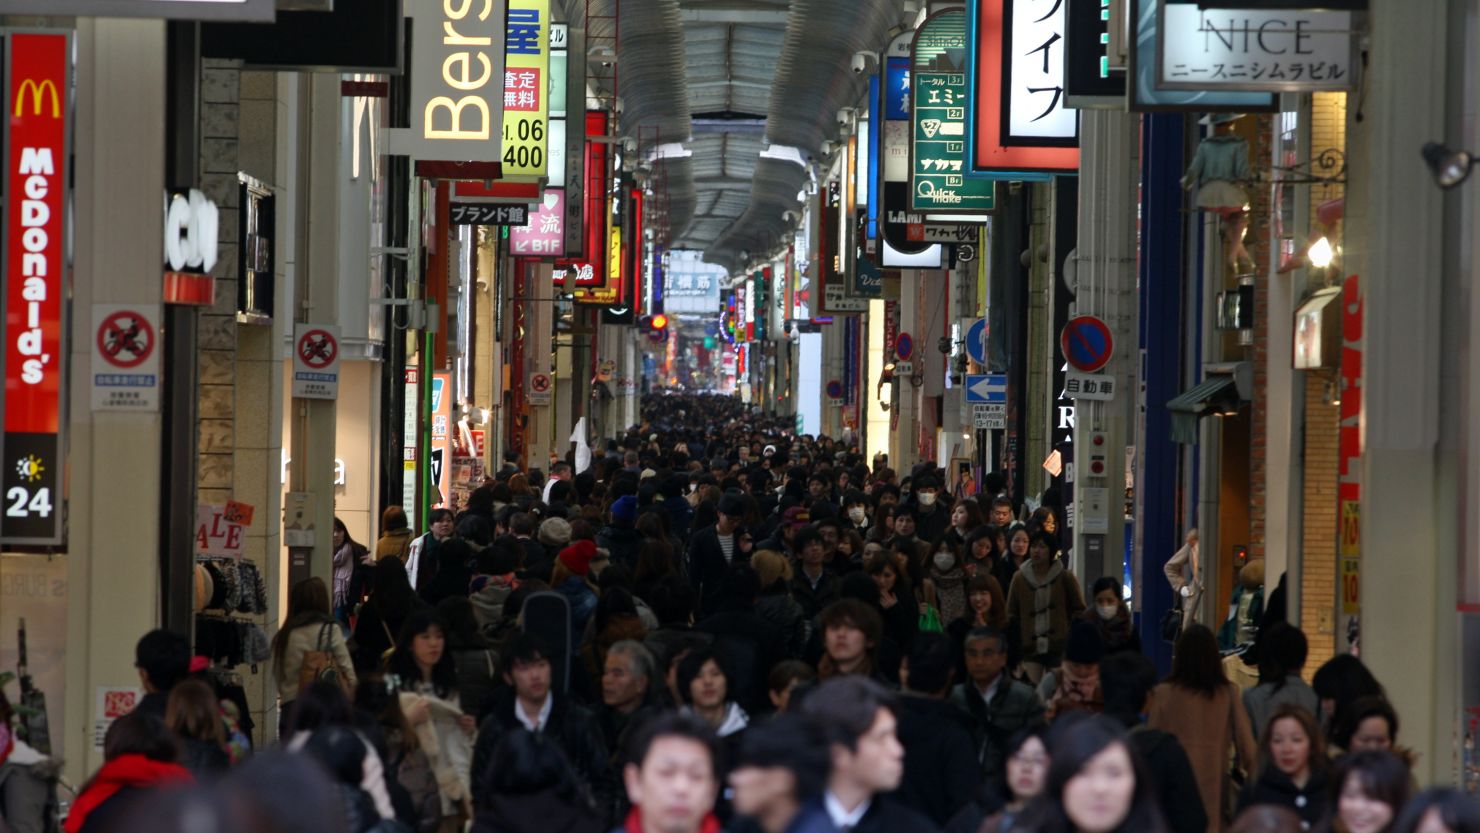 A shopping street in the Japanese city of Osaka on February 6, 2013.